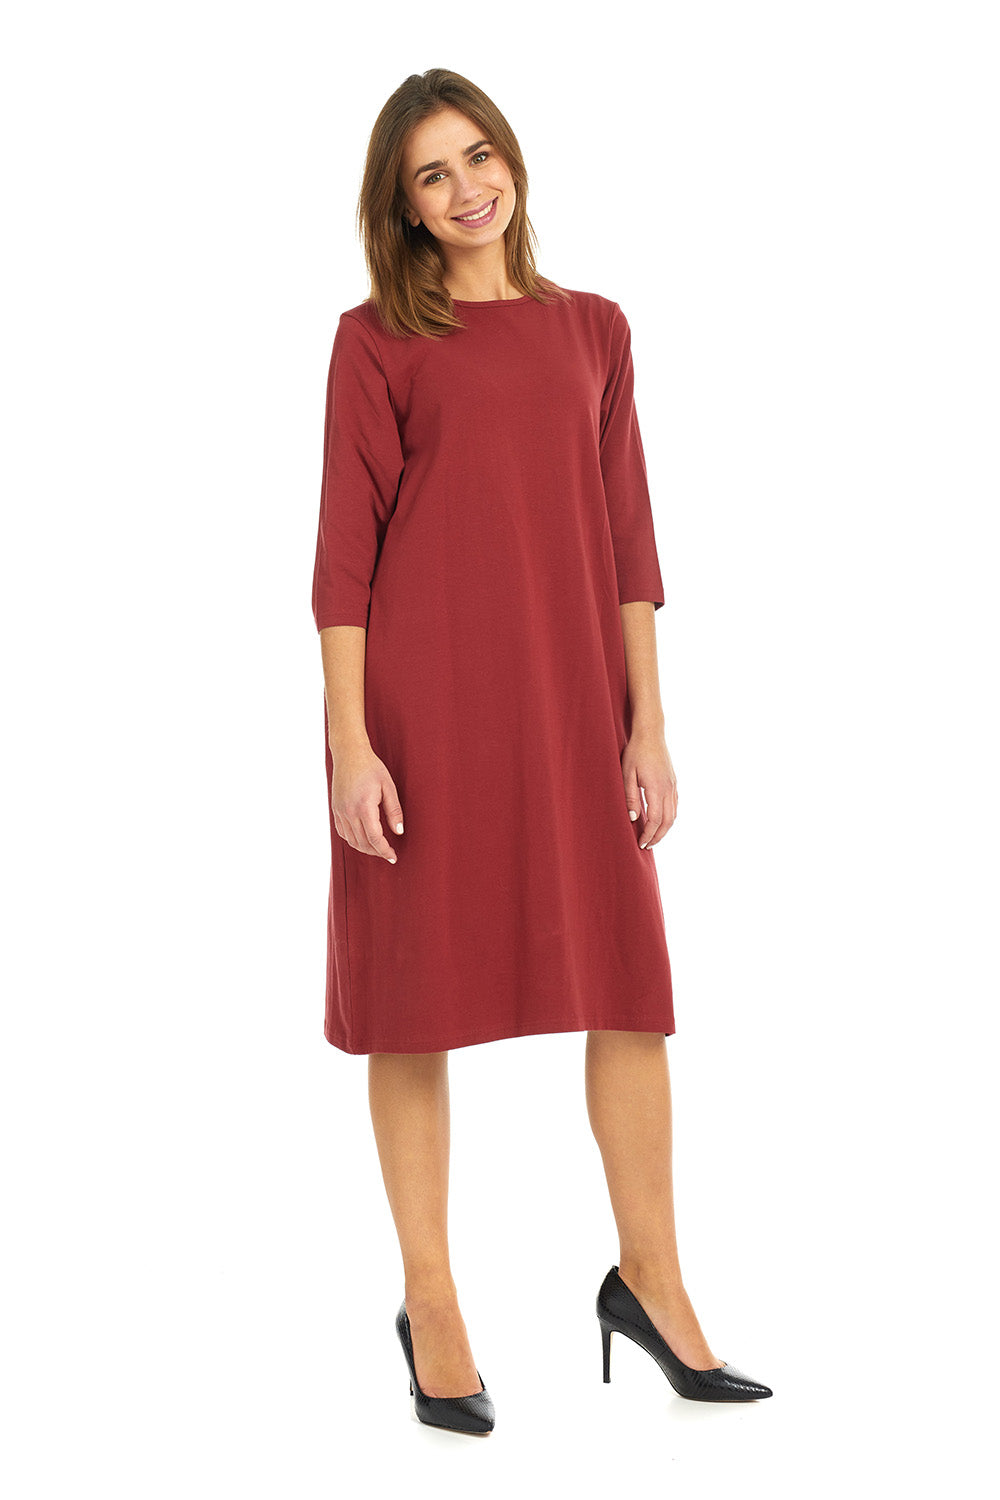 Soft and cozy plus size cotton burgundy t-shirt dress with pockets. modest 3/4 sleeves and knee length